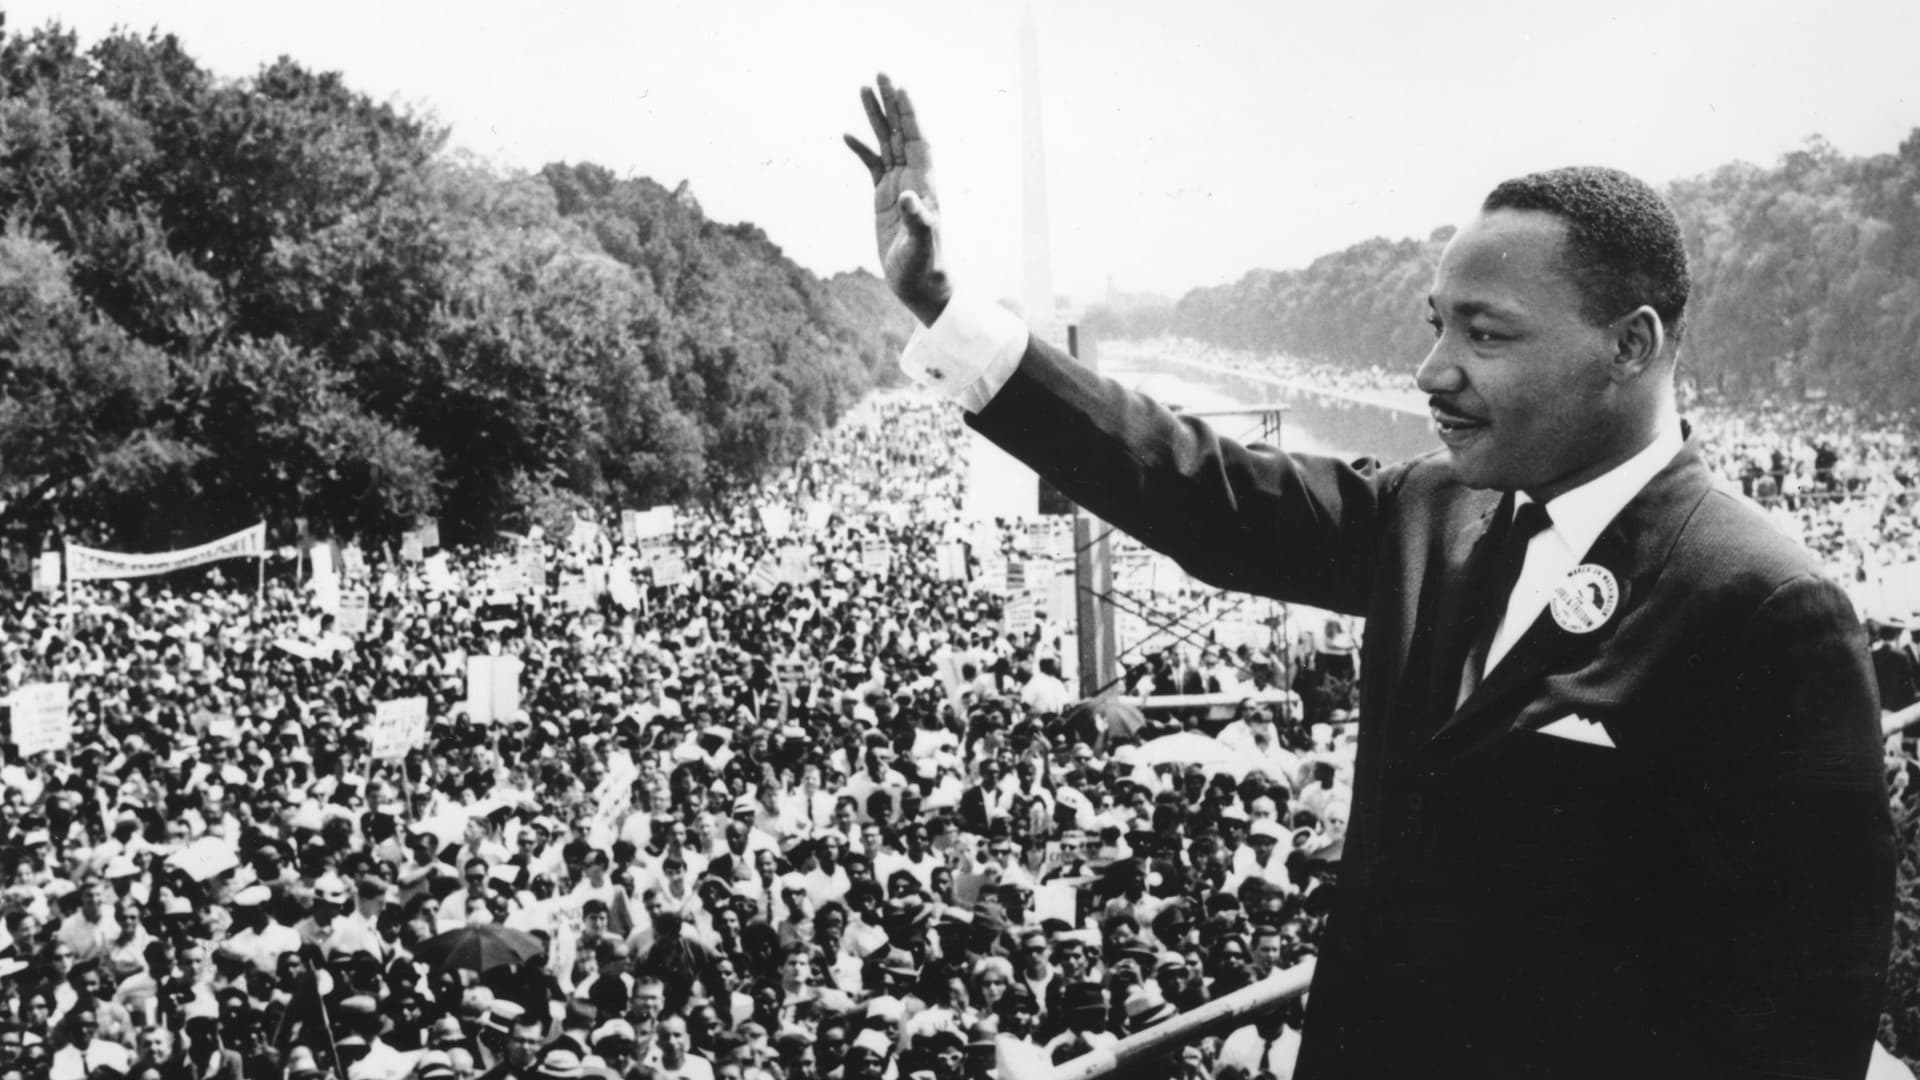 Martin Luther King addresses crowds during the March On Washington at the Lincoln Memorial, Washington DC, where he gave his 'I Have A Dream' speech in 1963.